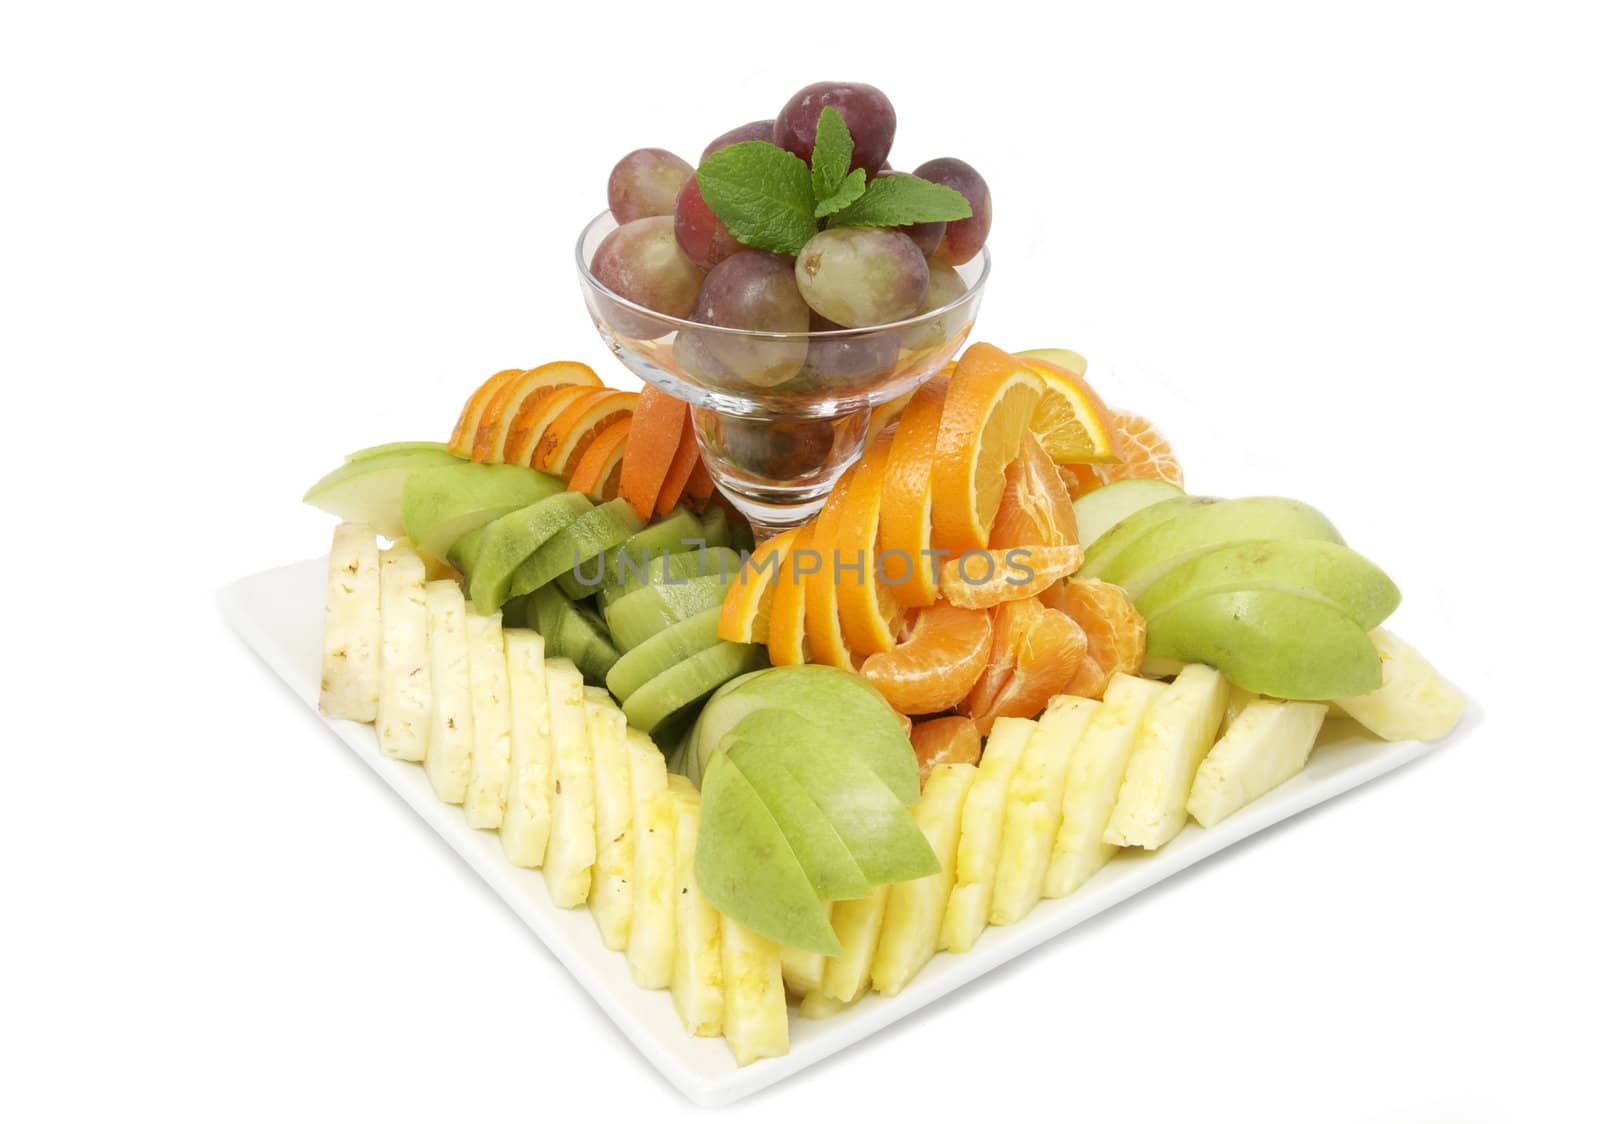 a large plate of fruit on a white background